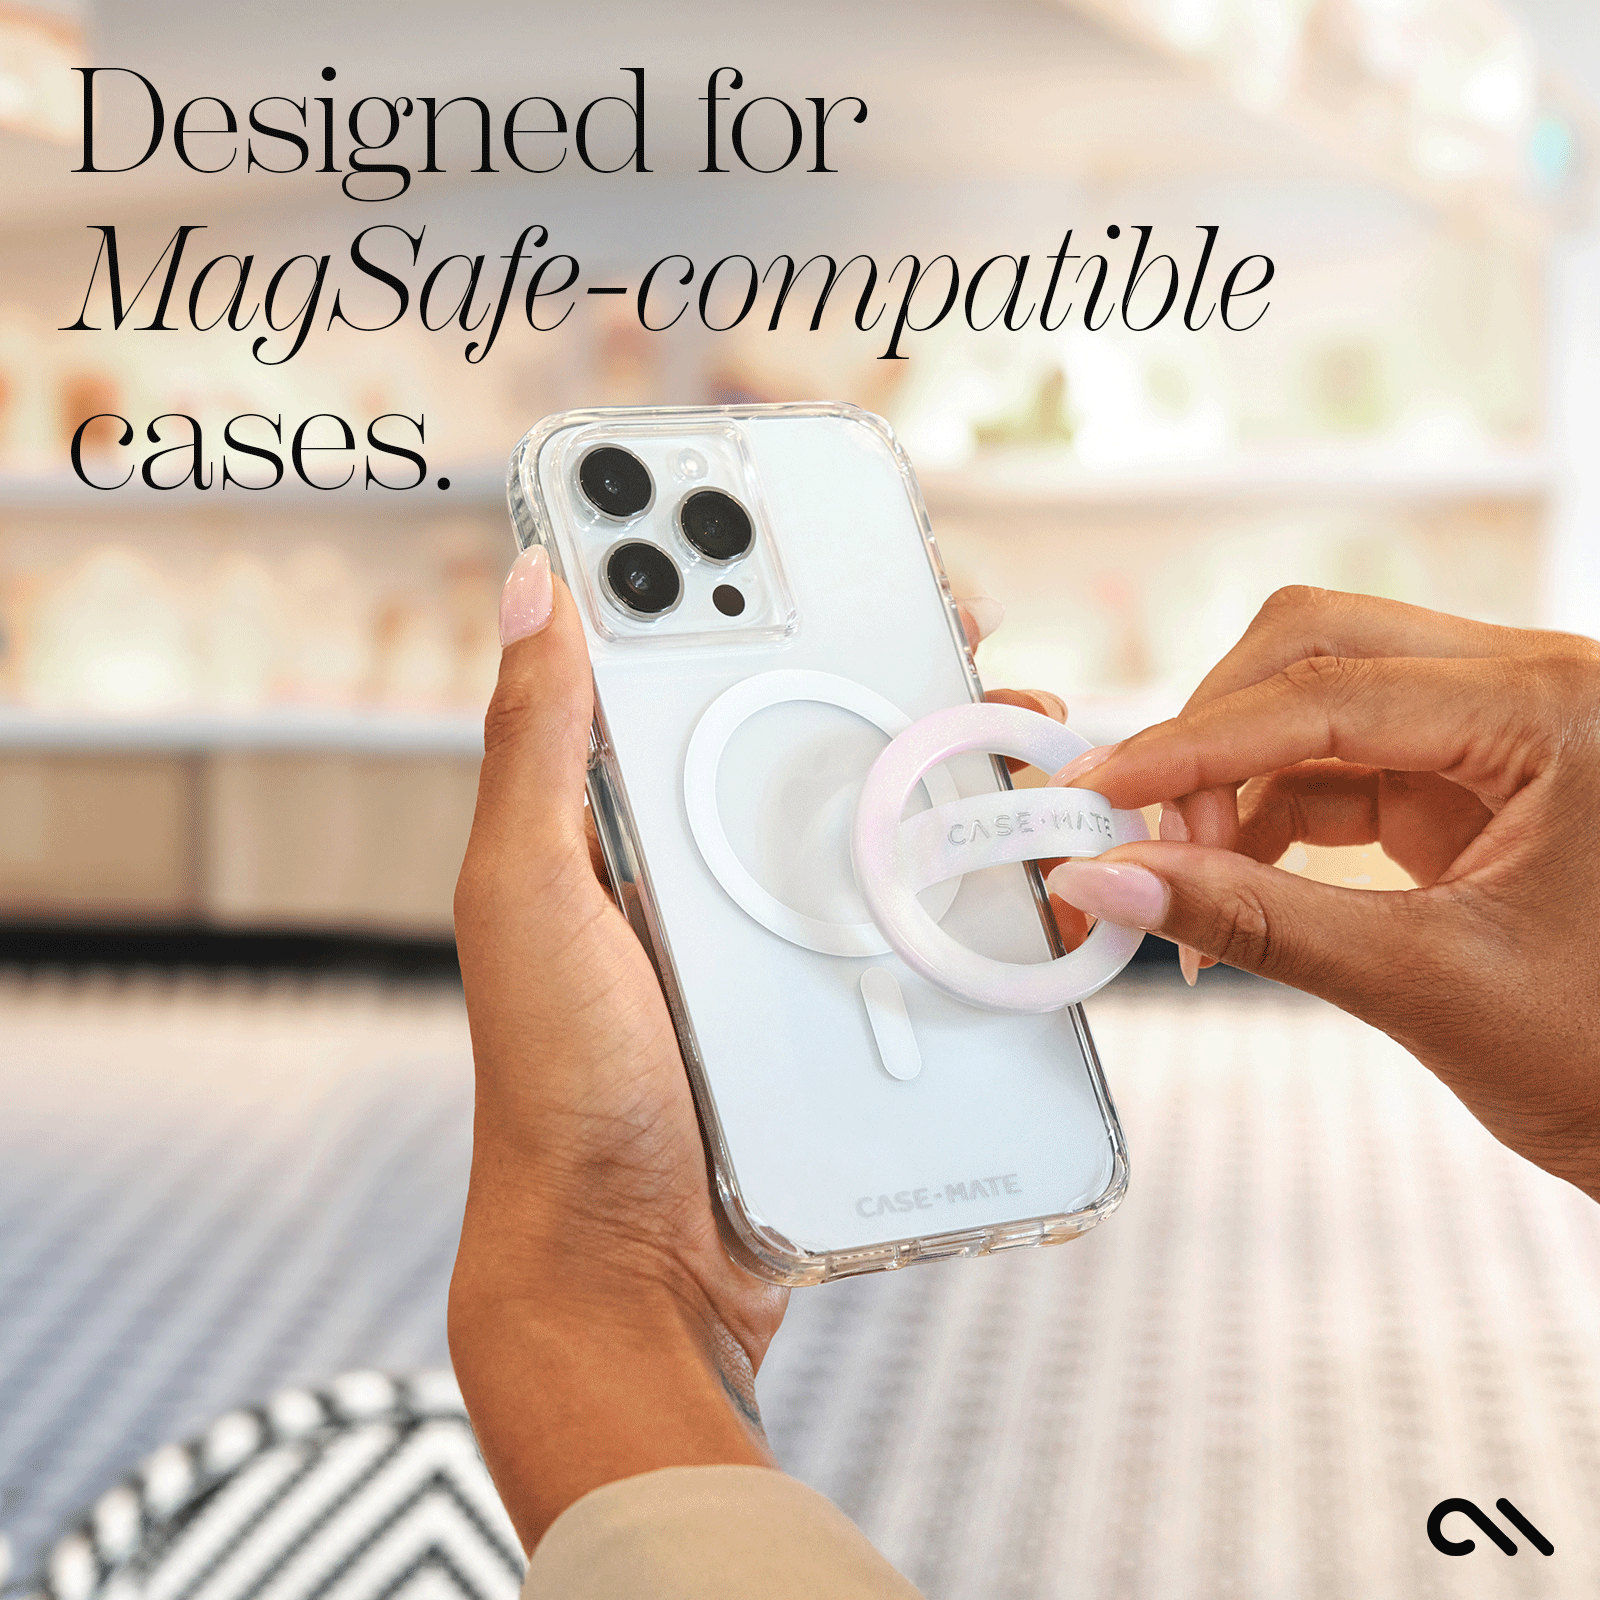 DESIGNED FOR MAGSAFE-COMPATIBLE CASES